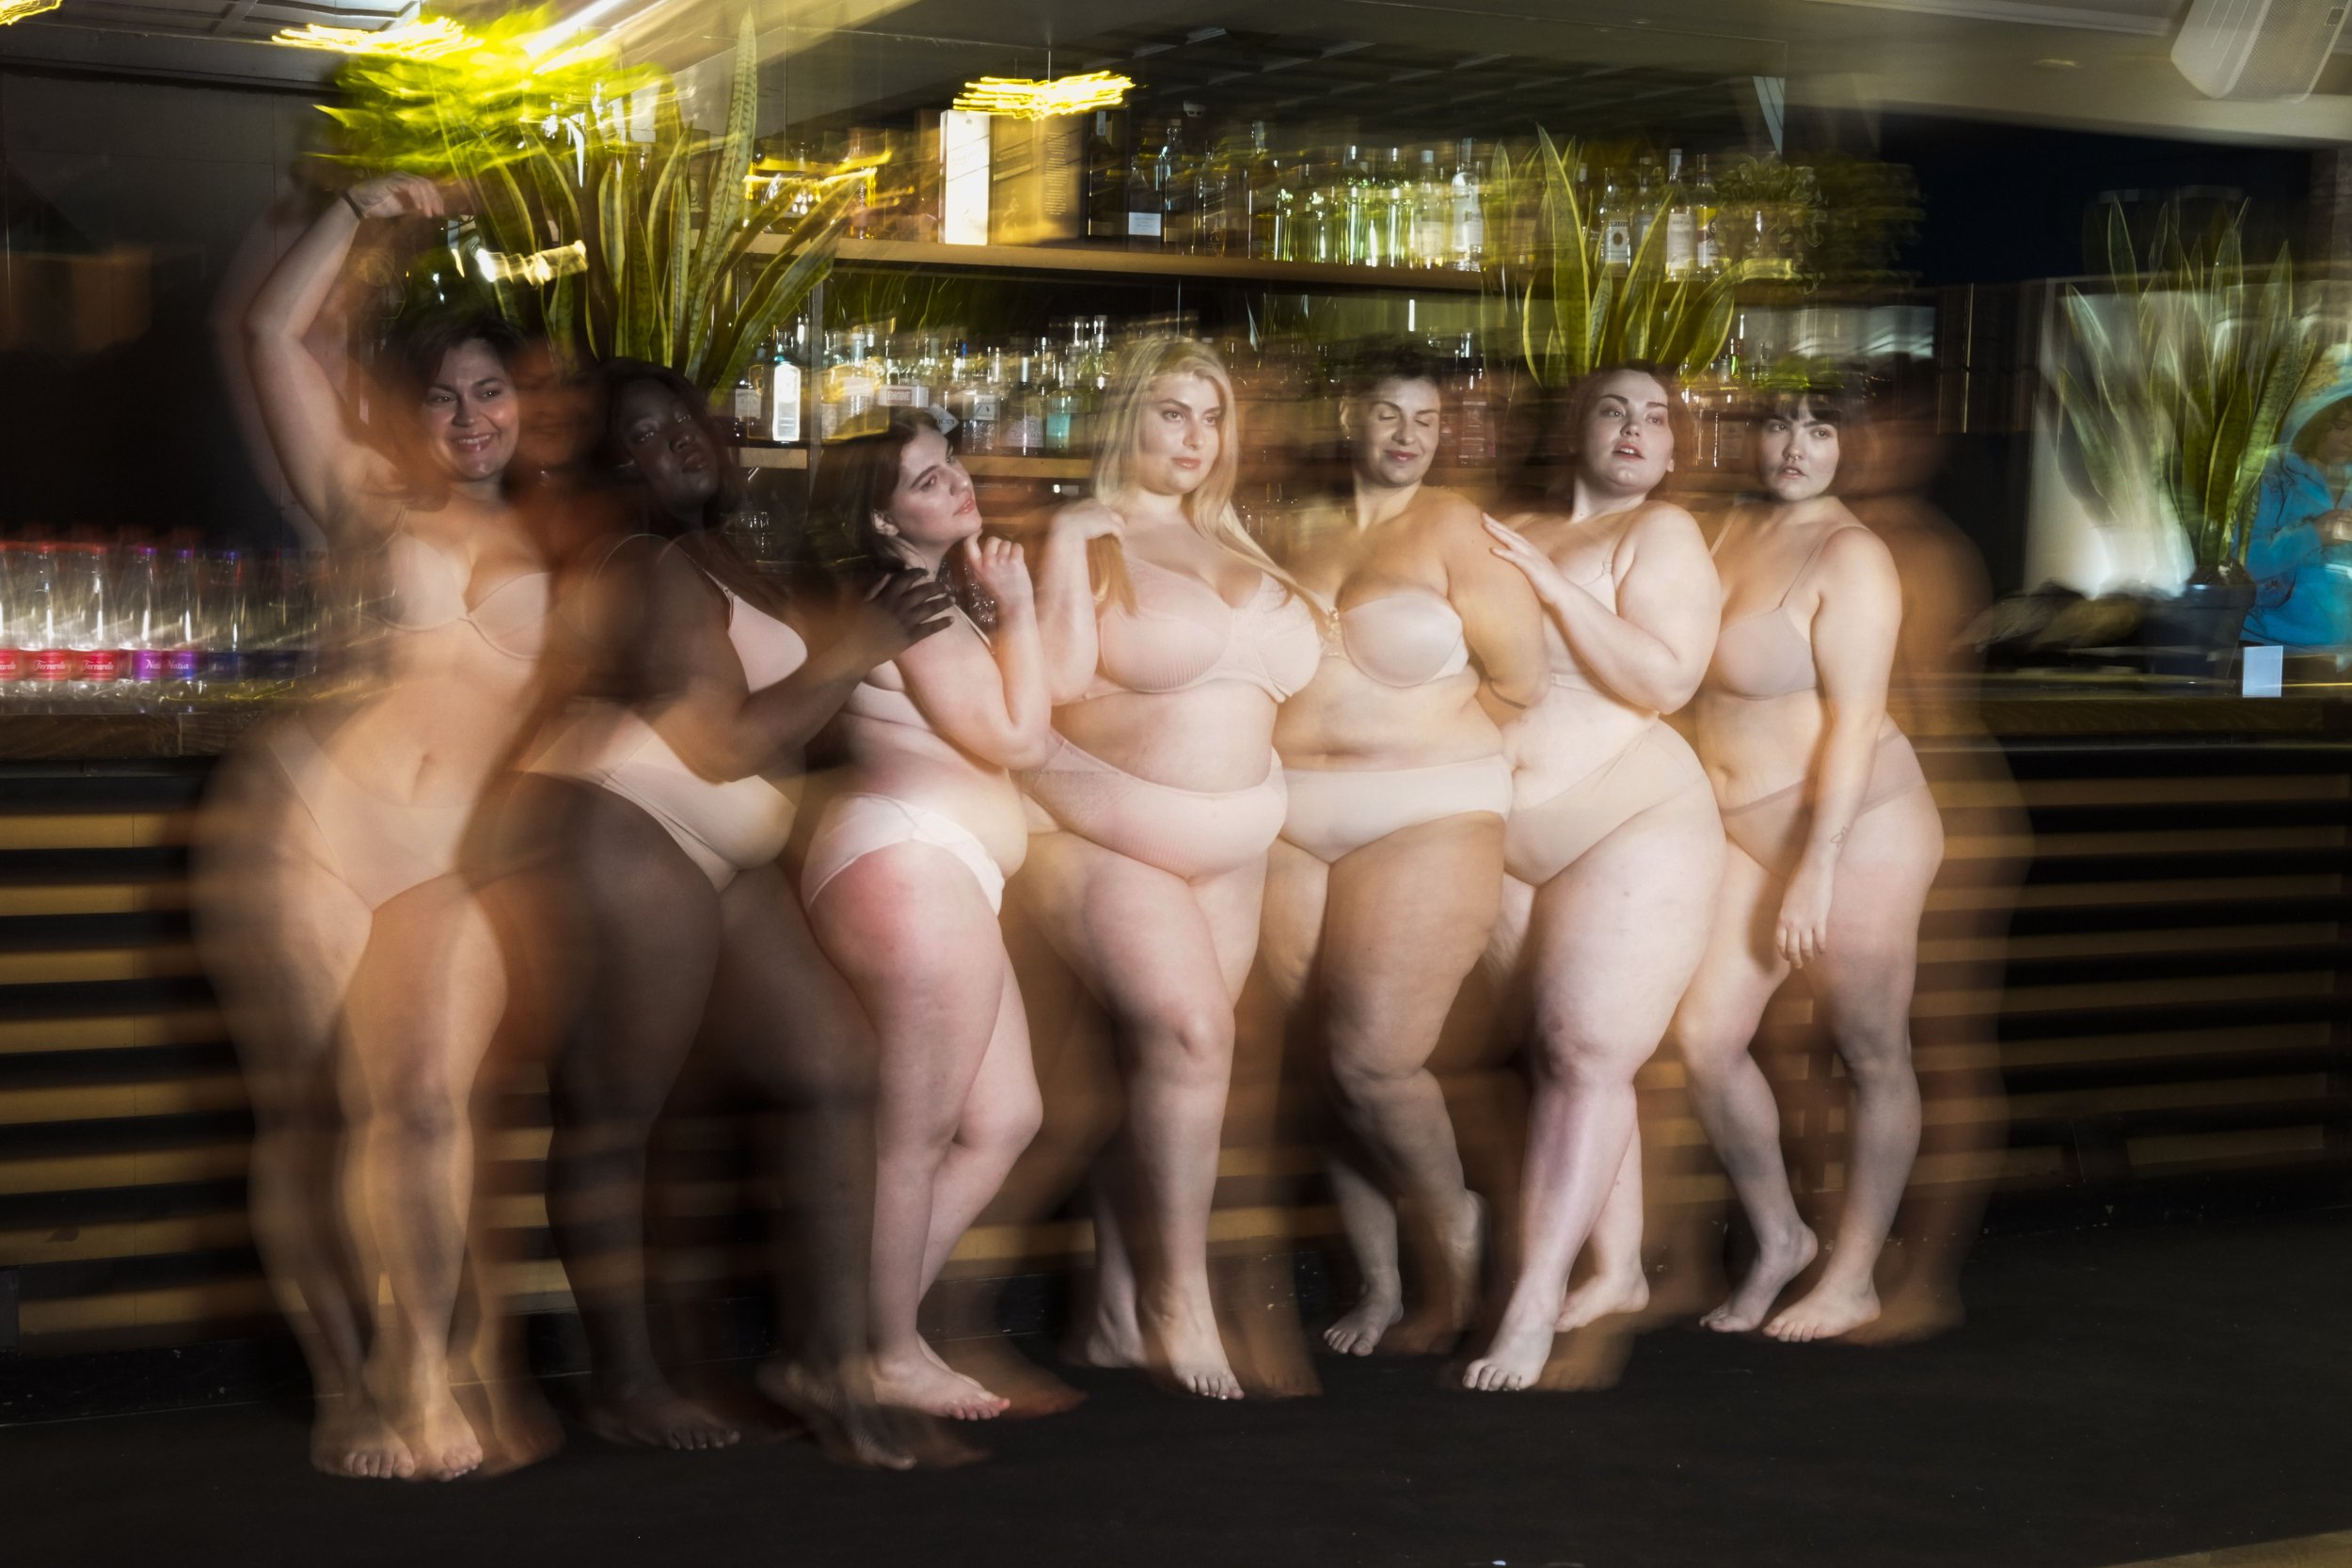  Models pose during a photo shoot for L’Imperfetta (The Imperfect) model agency in Rome on Feb. 7, 2023. The agency represents people who don’t fit neatly into the fashion industry's pre-established standards of beauty. (AP Photo/Alessandra Tarantino